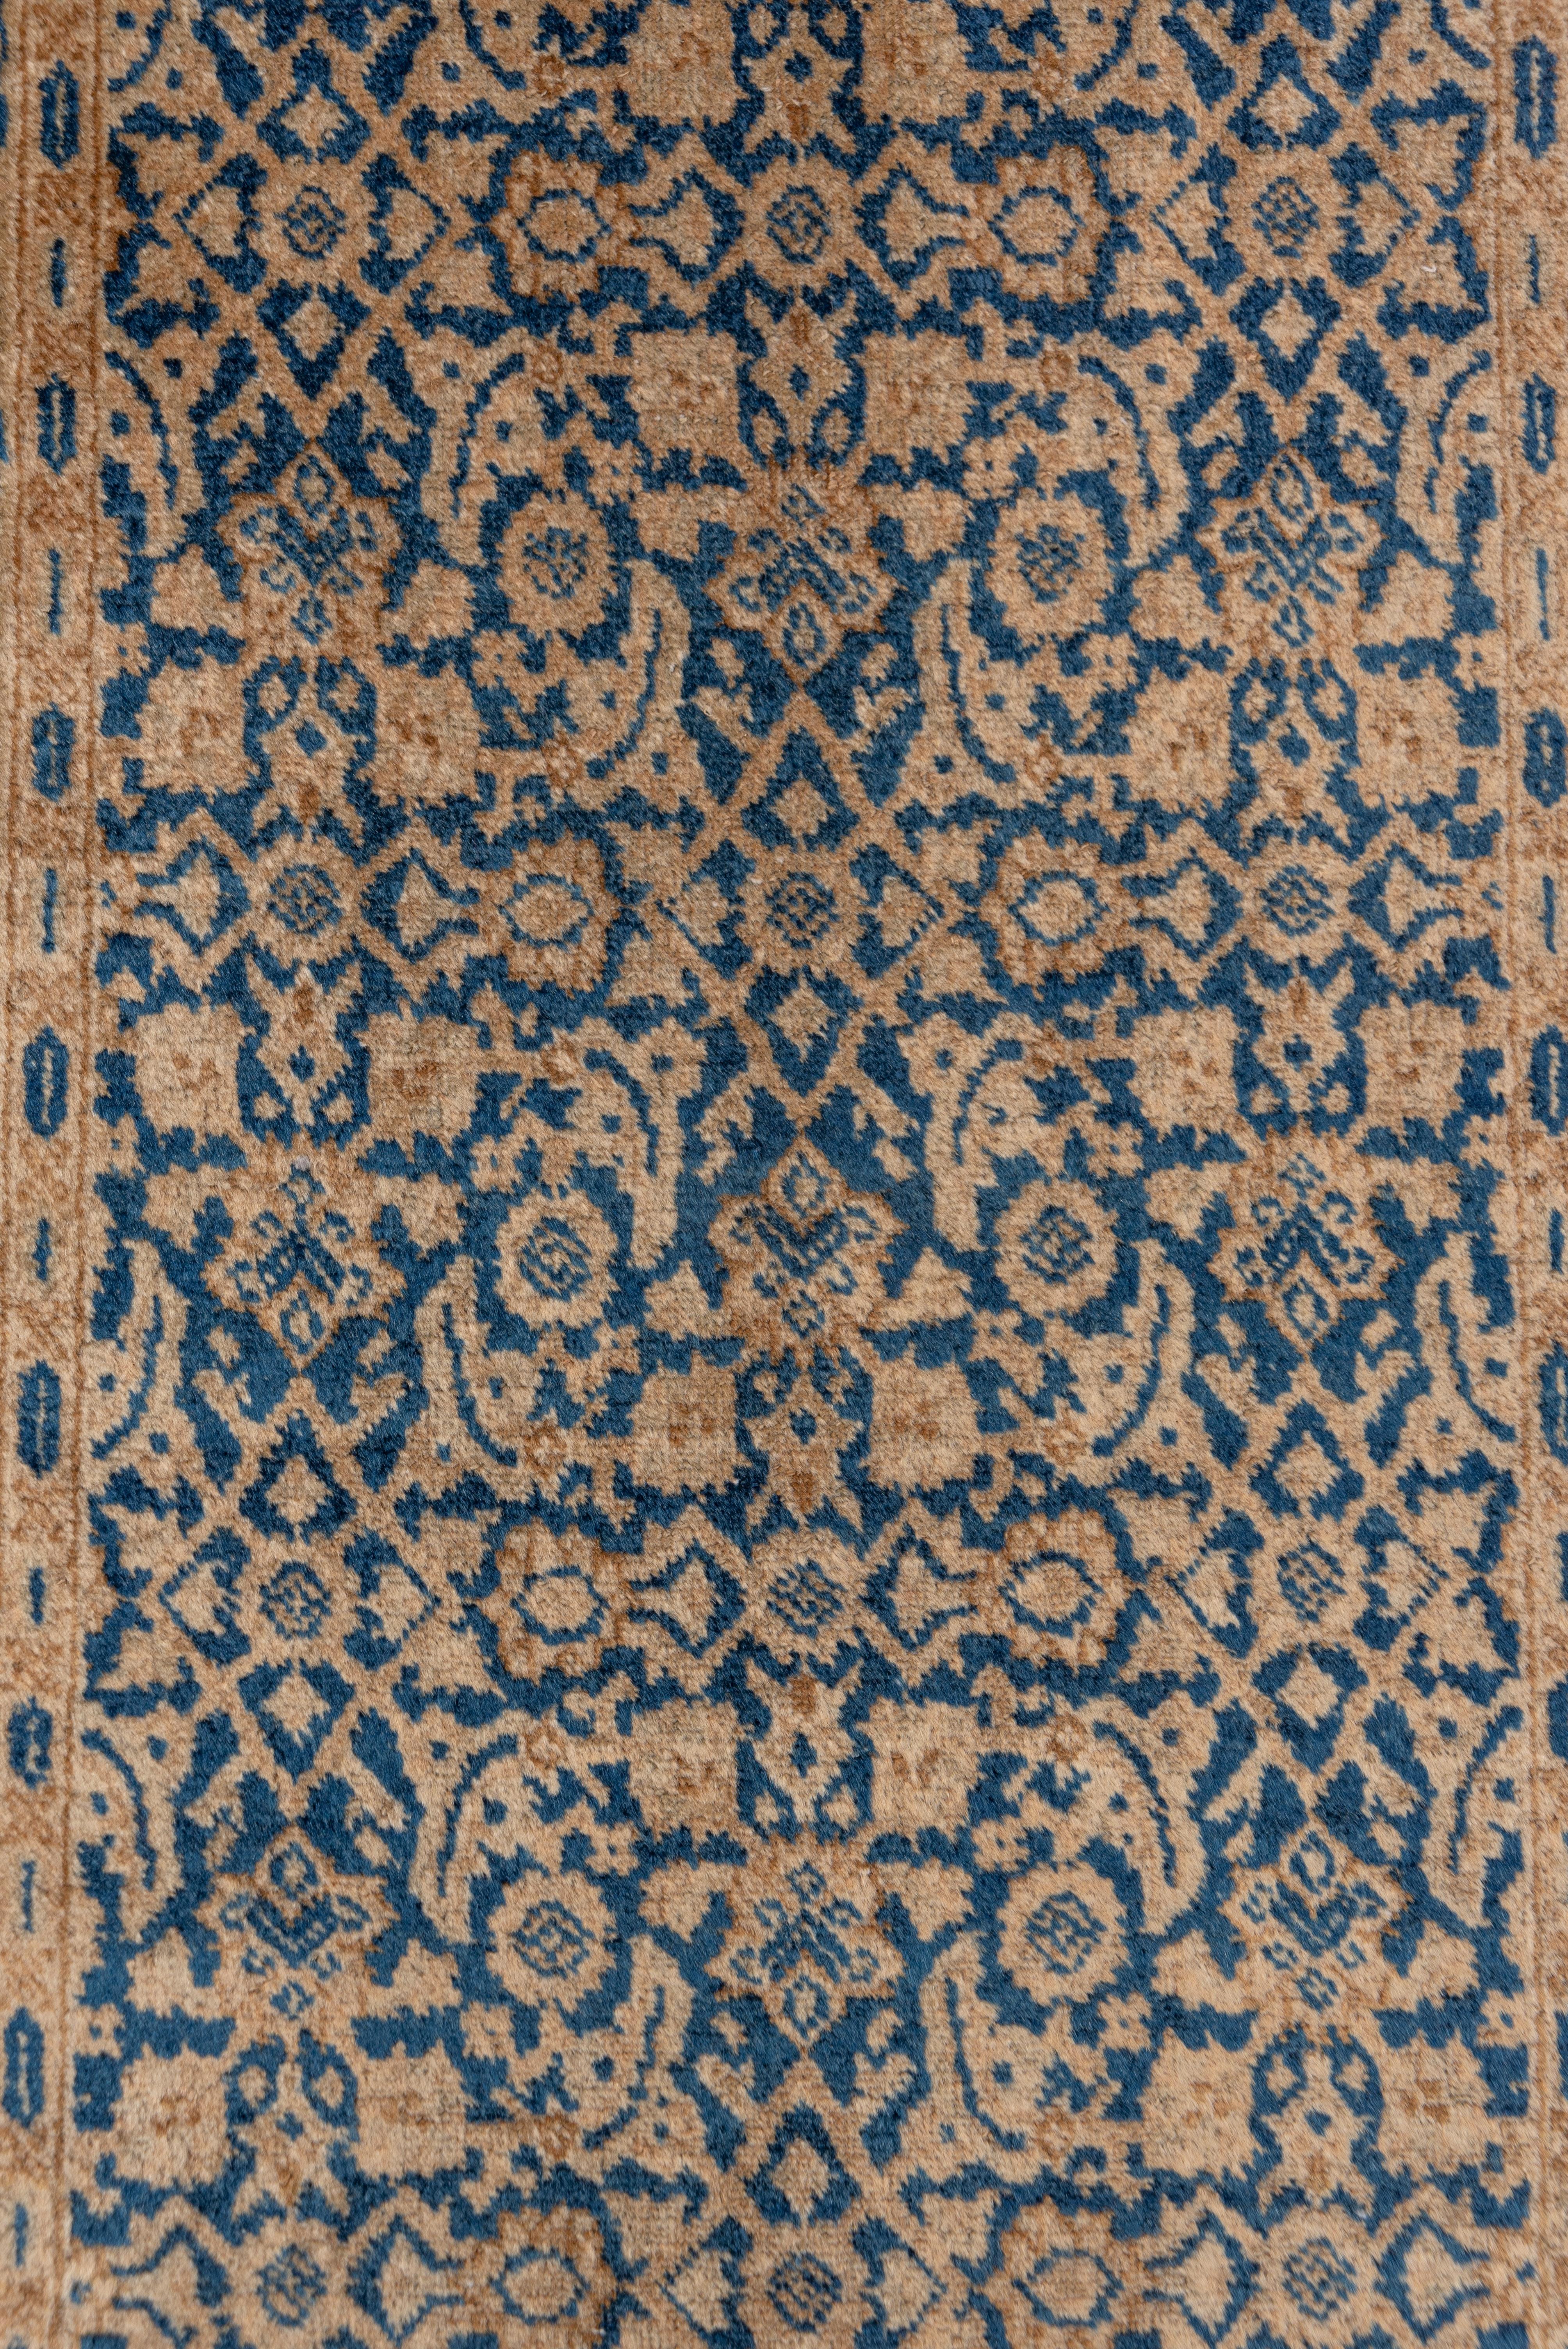 Long and Narrow Antique Persian Tabriz Runner, Blue and Gold Tones, circa 1920s In Good Condition For Sale In New York, NY